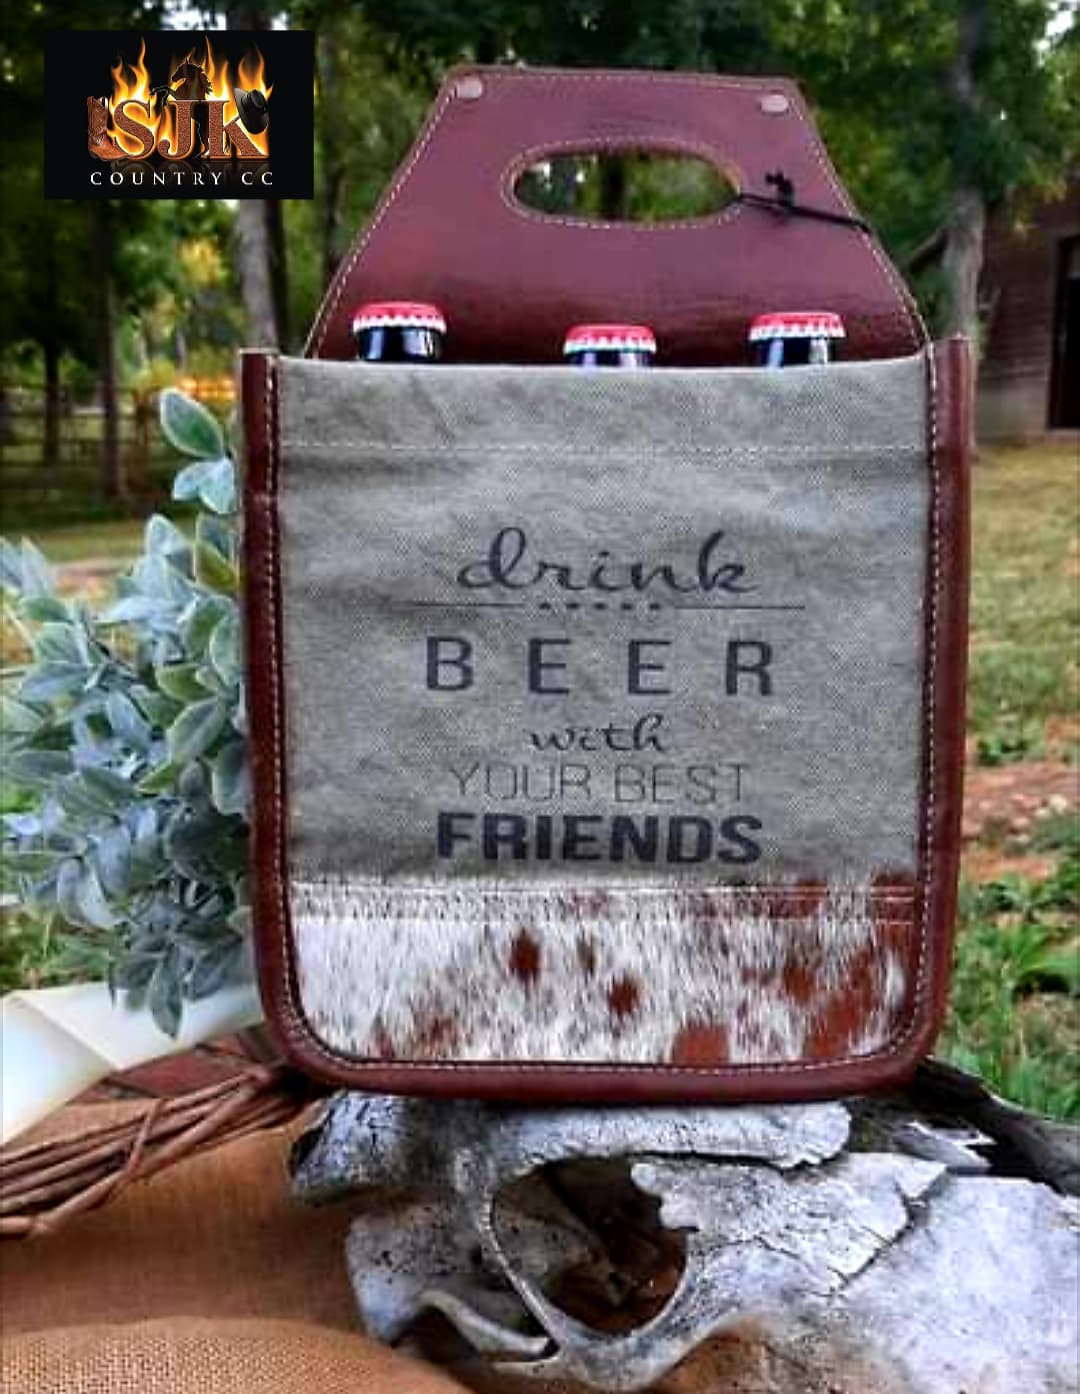 6-PACK BEER CADDY with  BEST FRIENDS logo